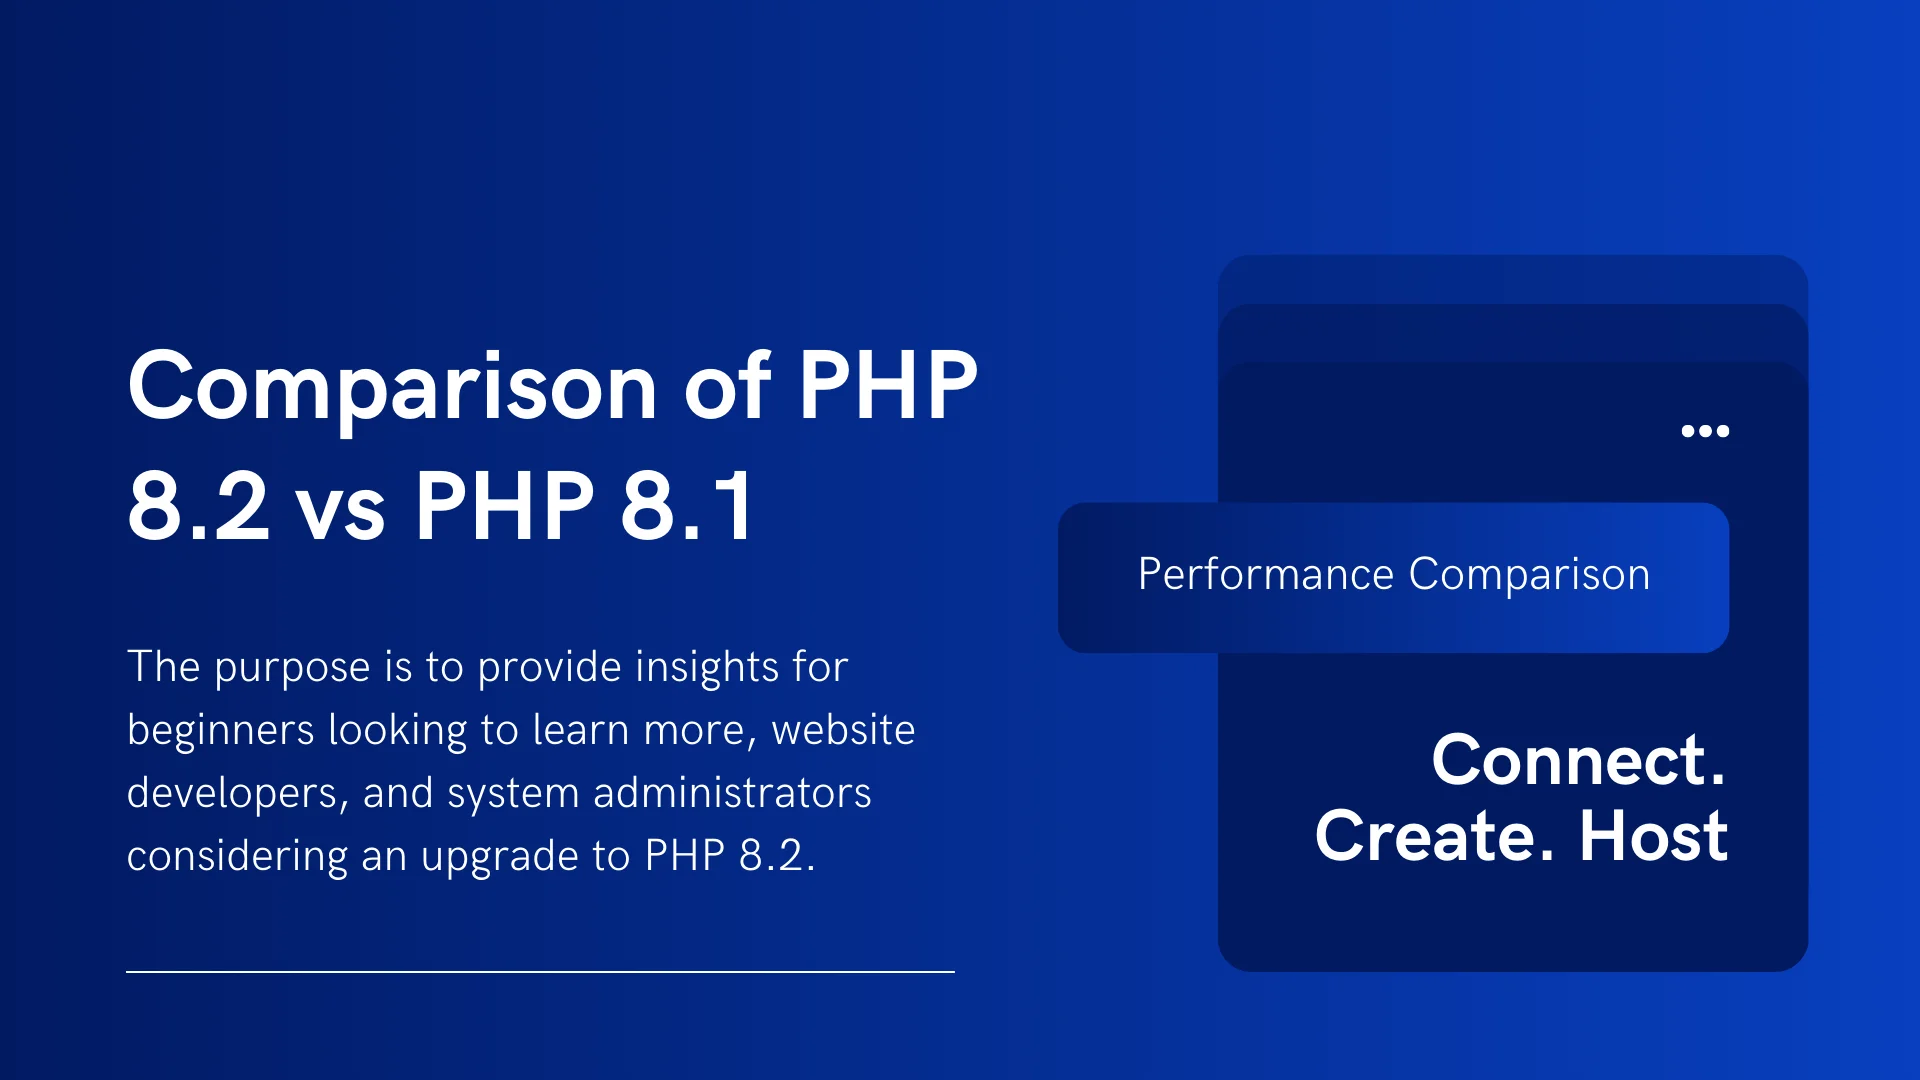 Performance Comparison of PHP 8.2 vs PHP 8.1